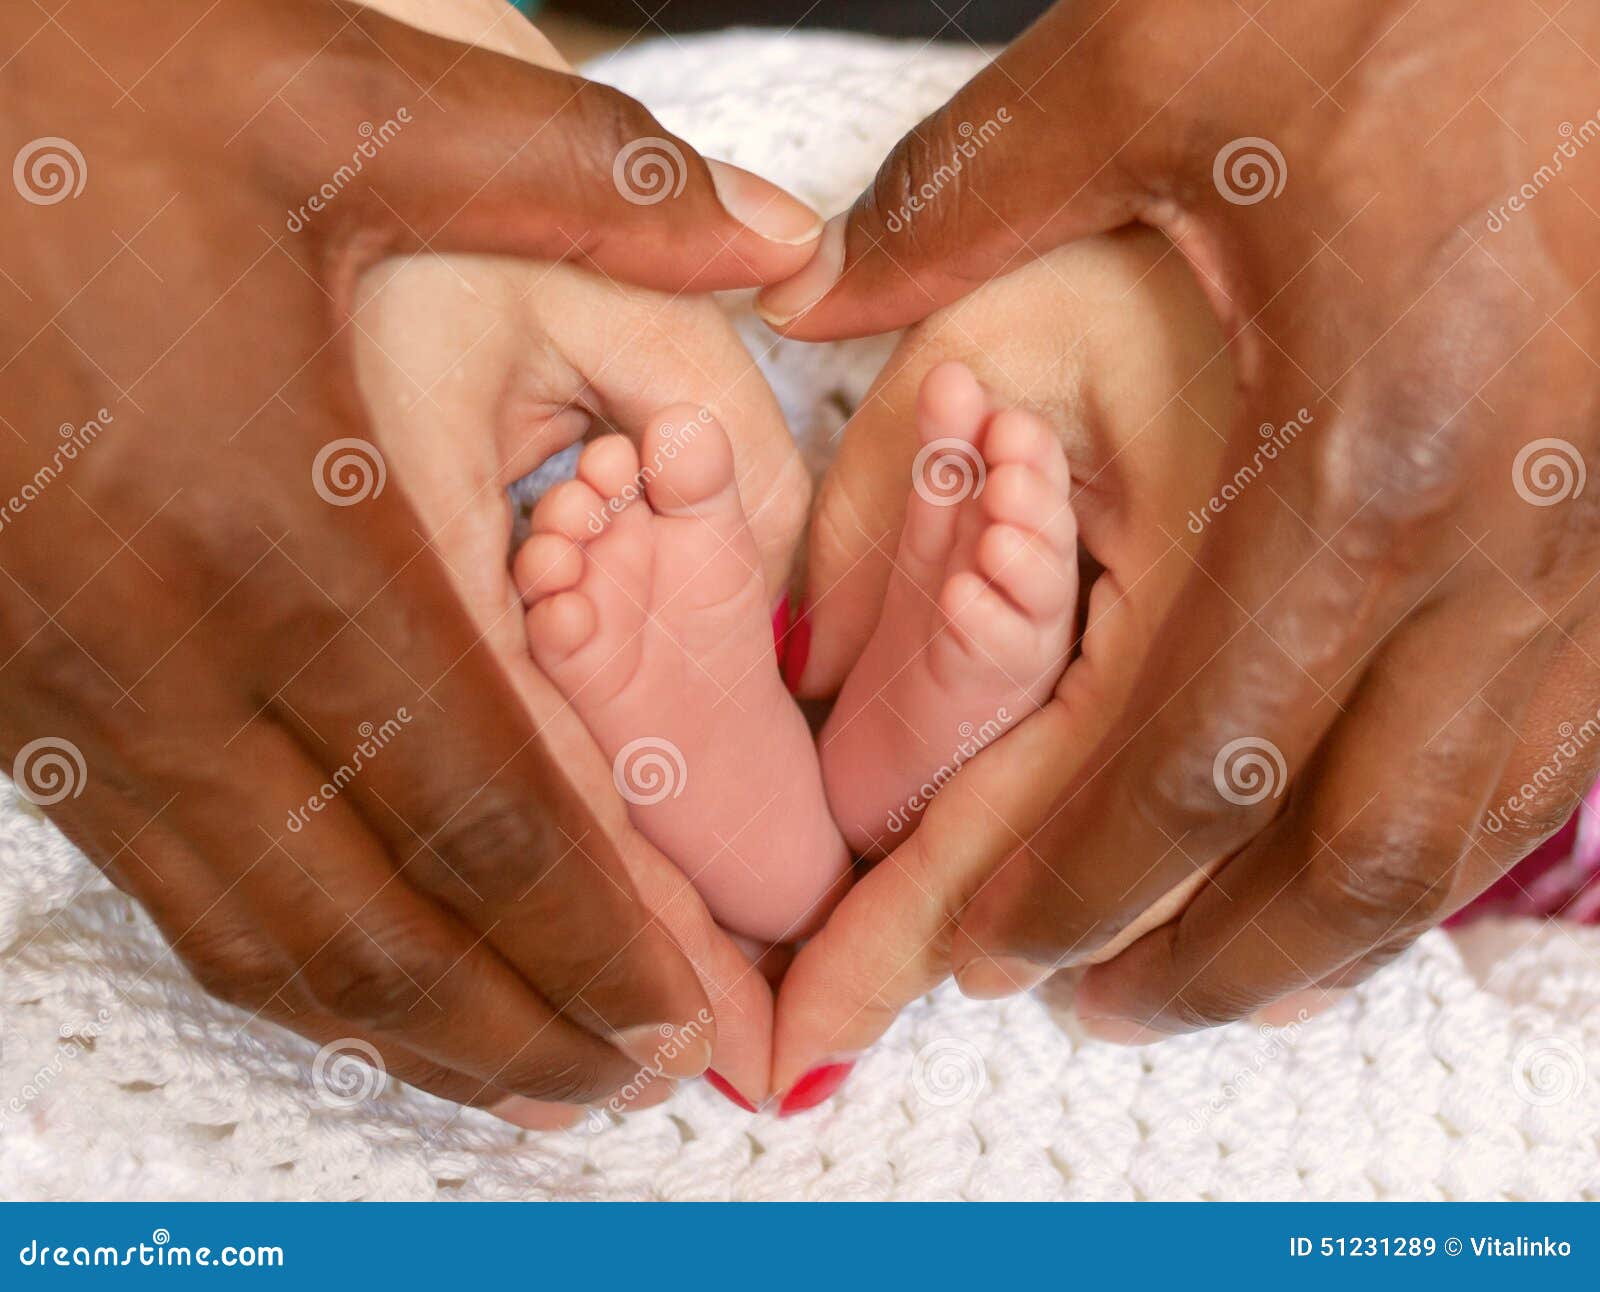 multiracial family concept. hands holding mulatto baby feet .